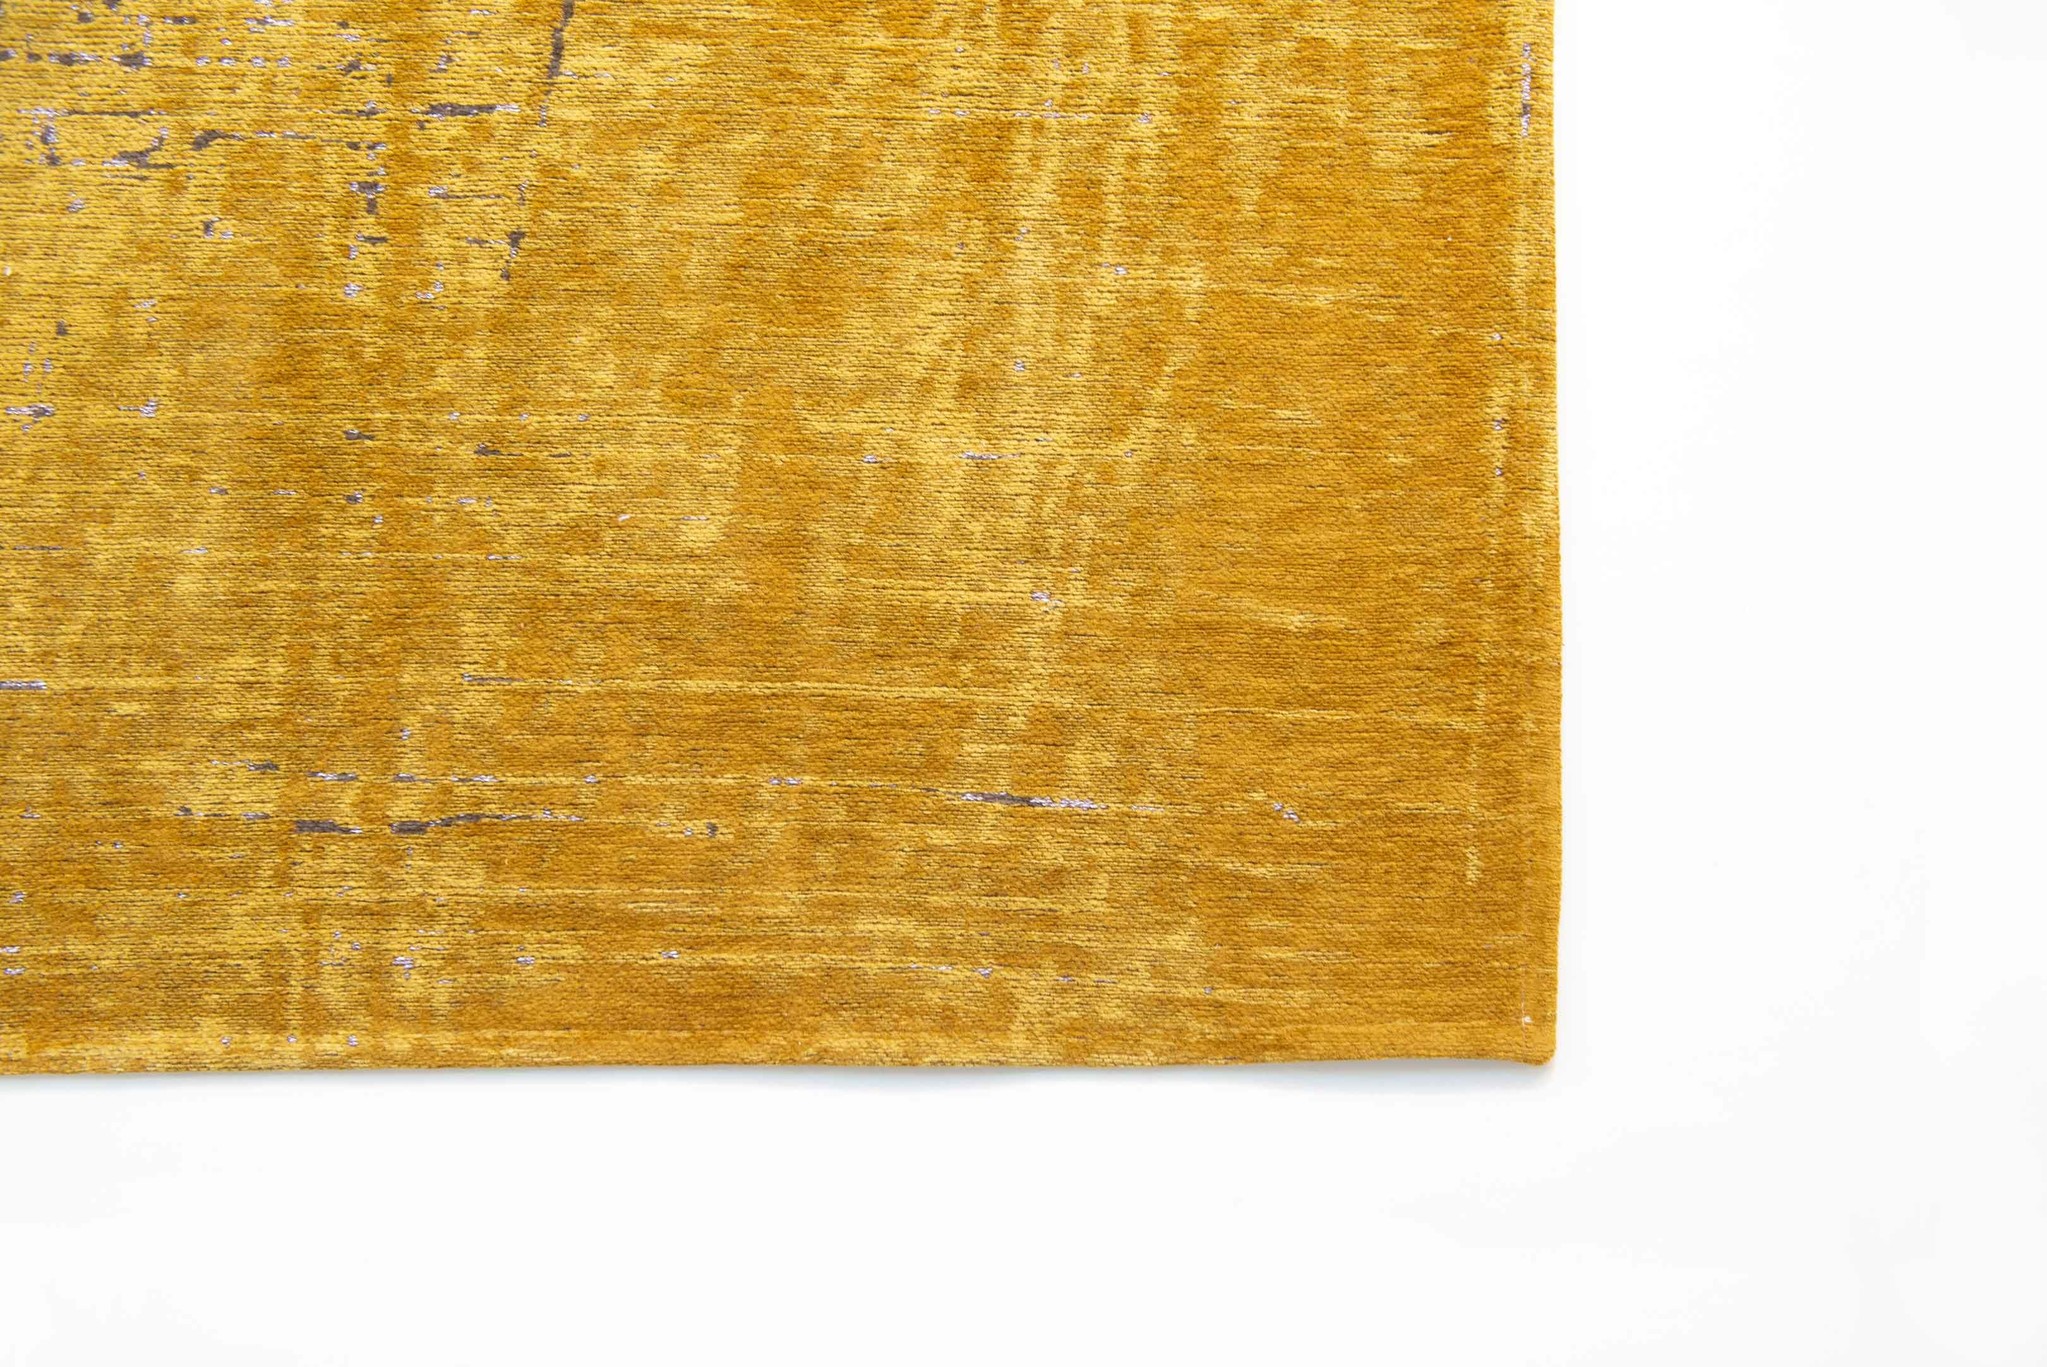 Abstract Gold Belgian Rug ☞ Size: 9' 2" x 13' (280 x 390 cm)